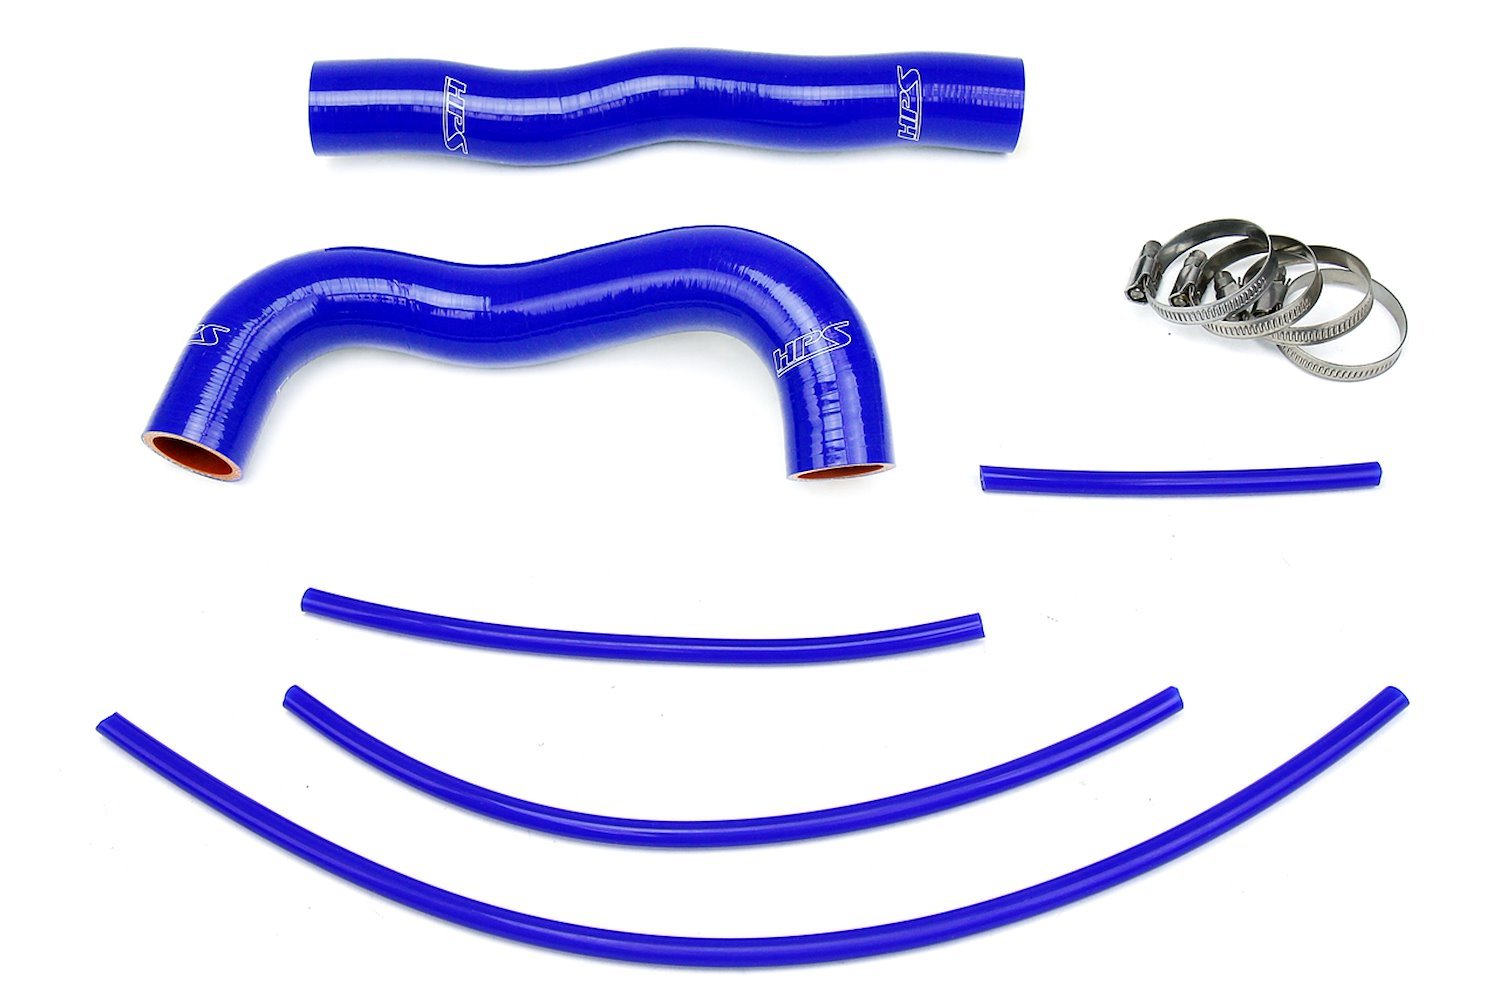 57-1324R-BLUE Radiator Hose Kit, High-Temp 3-Ply Reinforced Silicone, Replace OEM Rubber Radiator Coolant Hoses